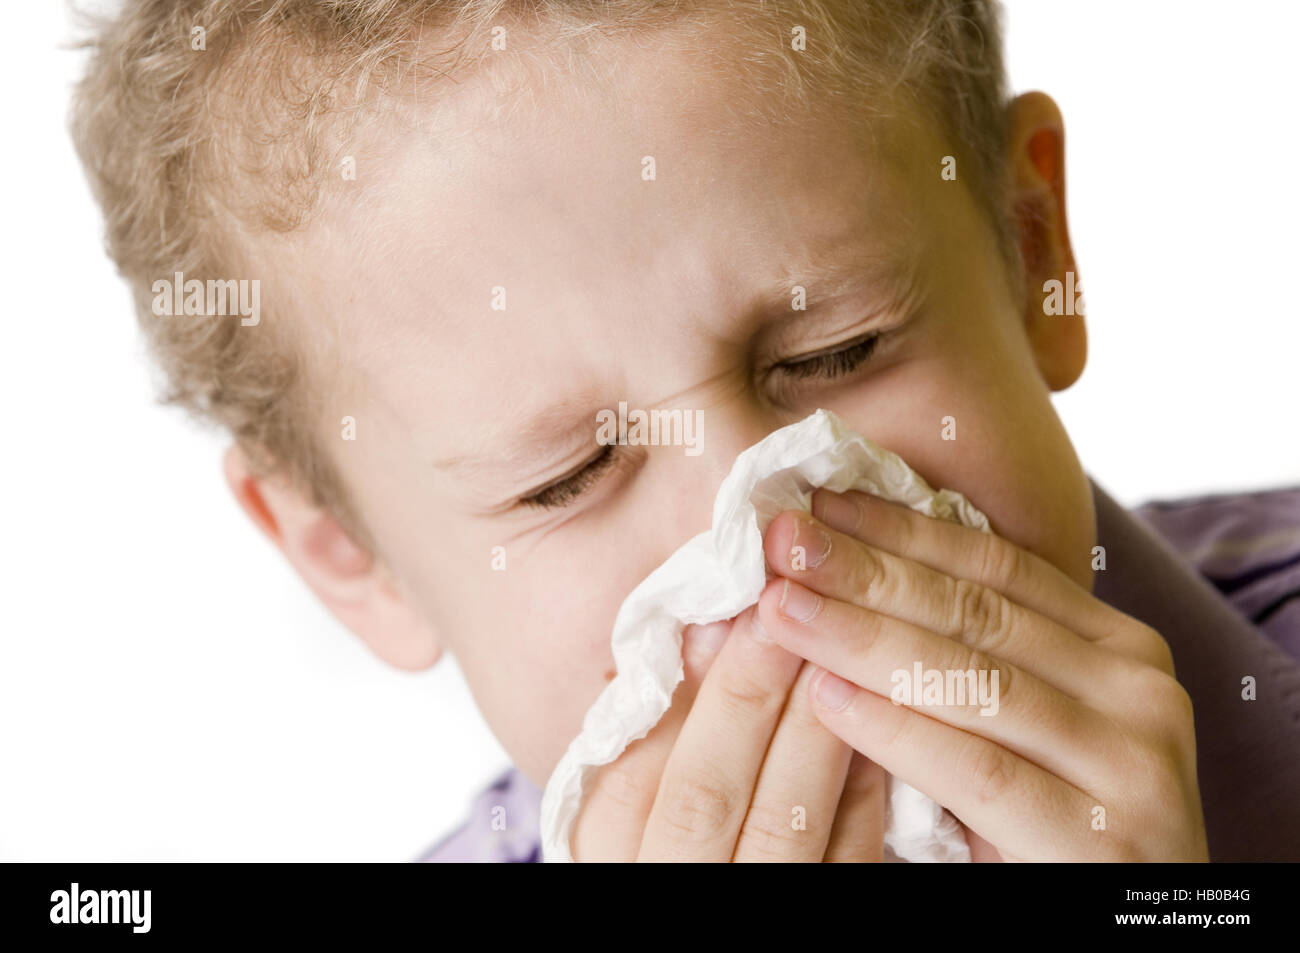 boy blow nose closed eyes Stock Photo